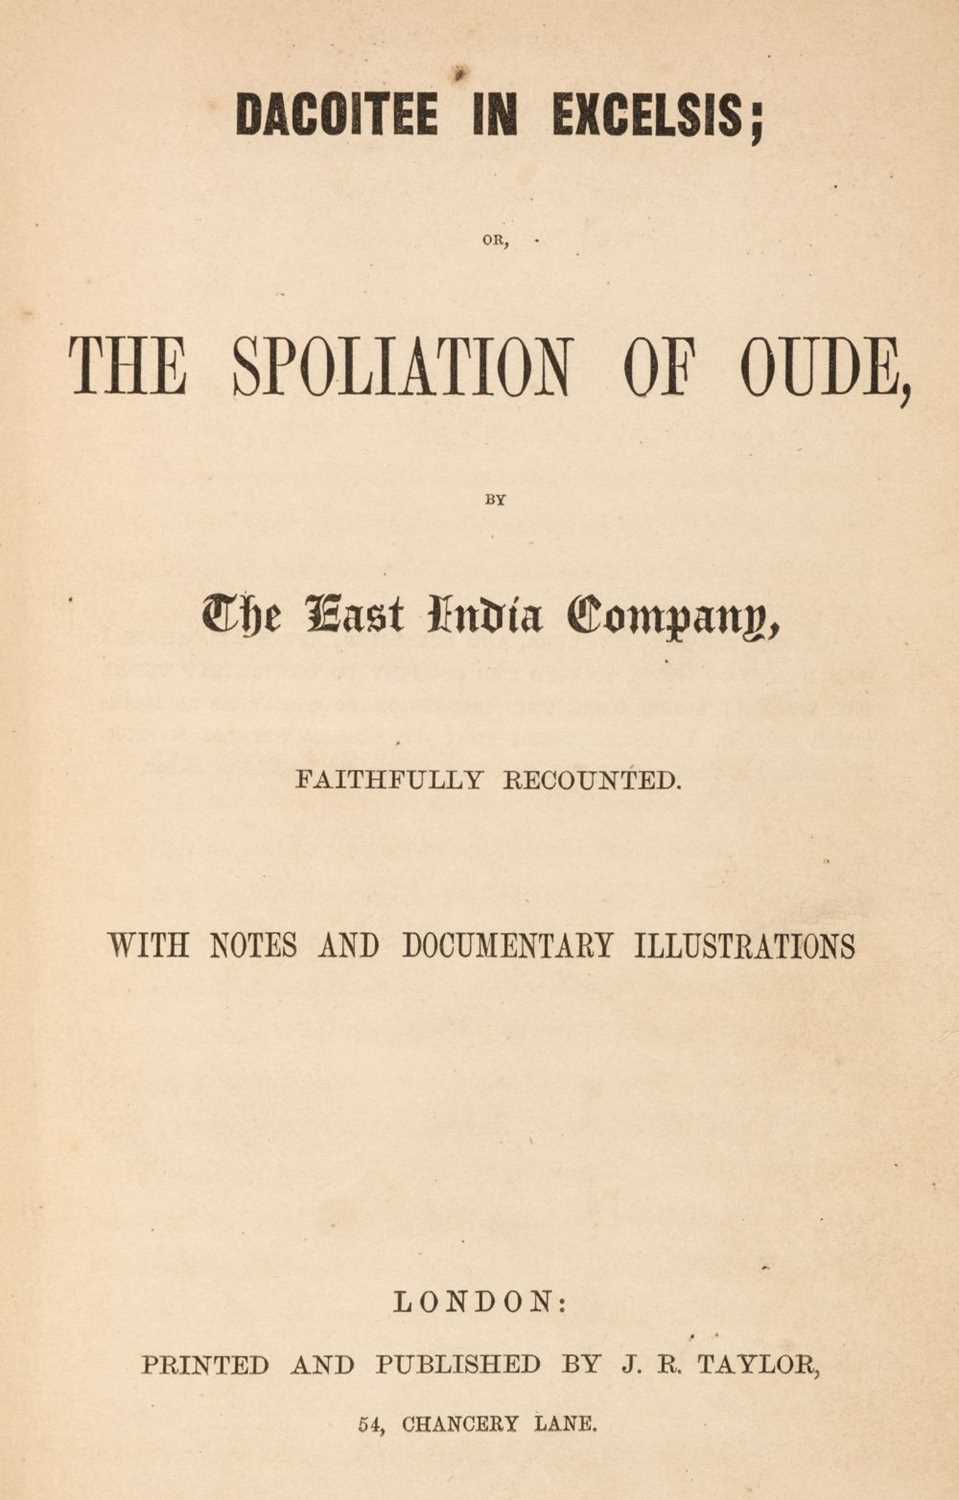 Lot 24 - [Lucas, Samuel]. Dacoitee in Excelsis; or, The Spoliation of Oude, by The East India Company, [1857]